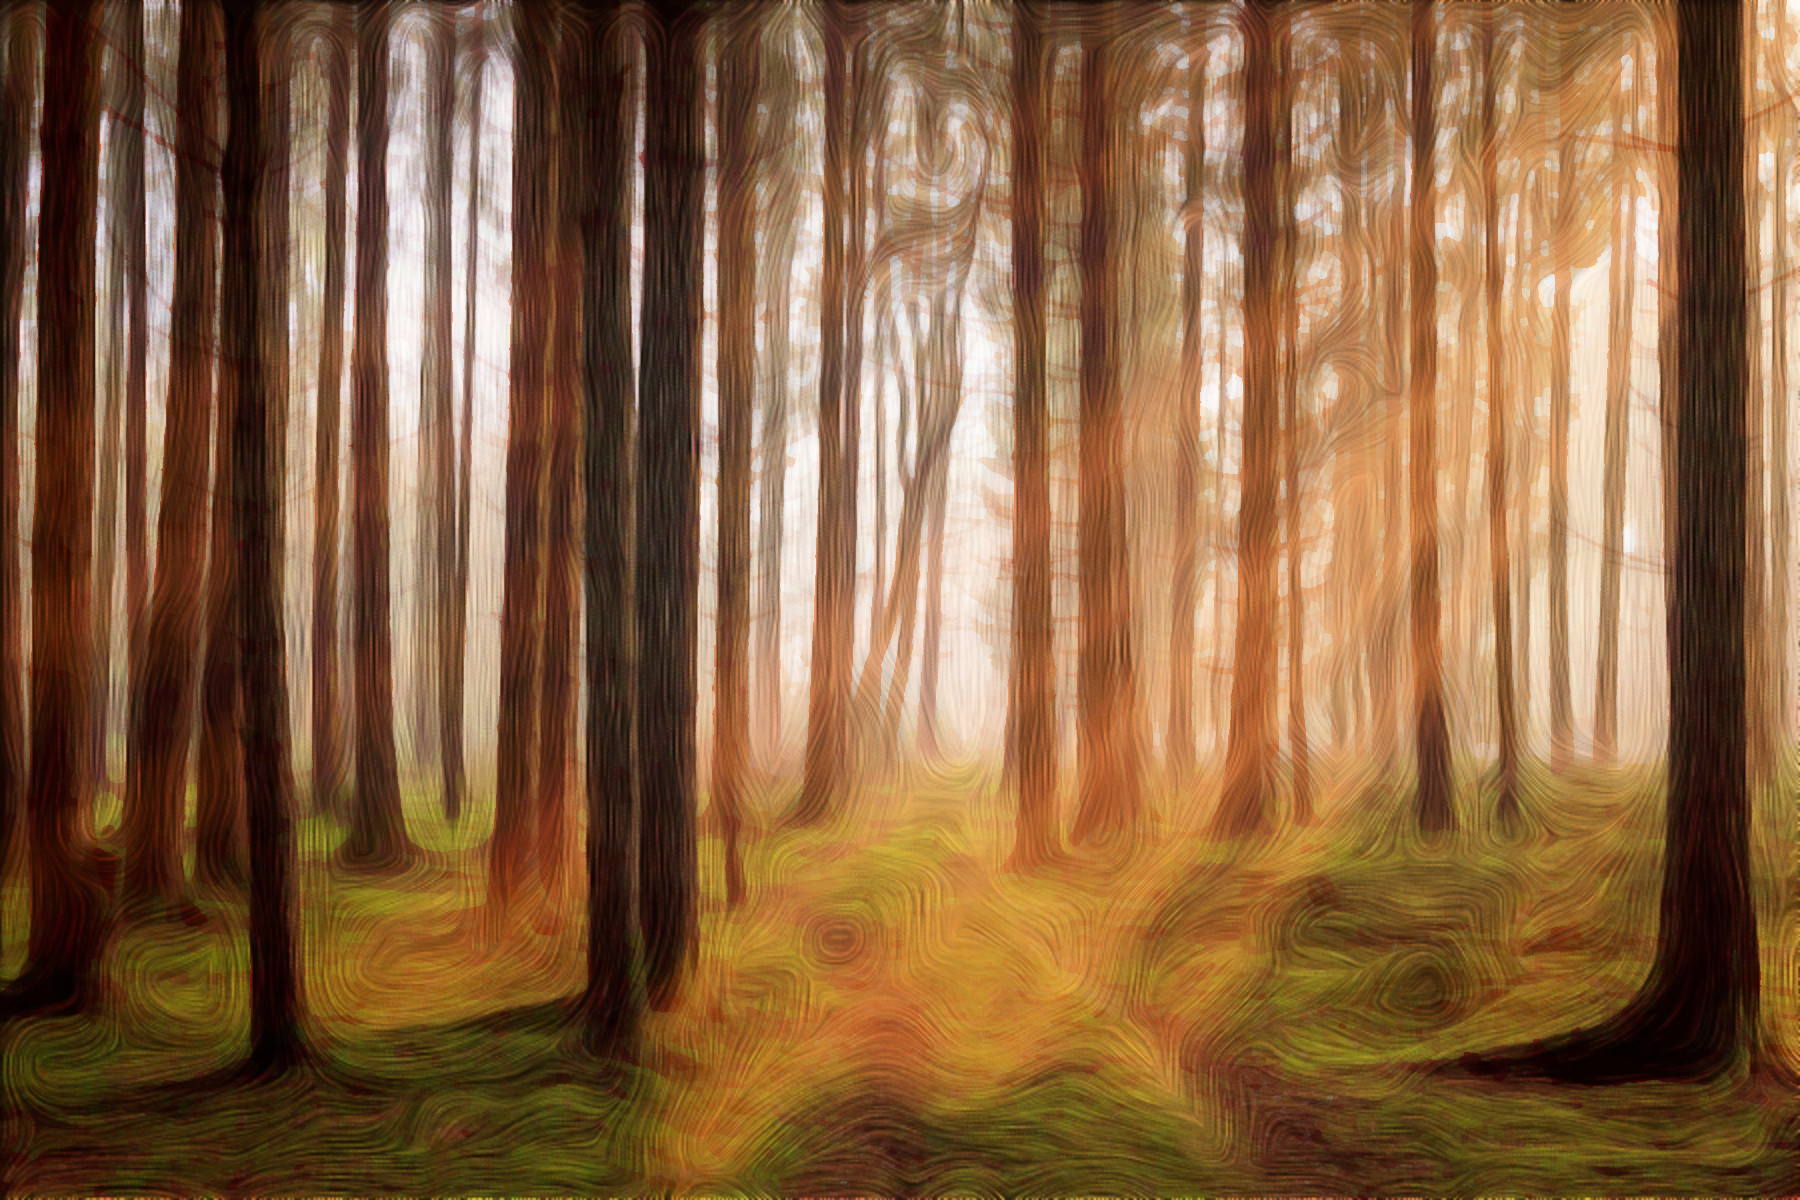 2022-01-28 06-27-51forest-g51cff09e7_1920 Finger Paint  using a deforn value of 8.jpeg